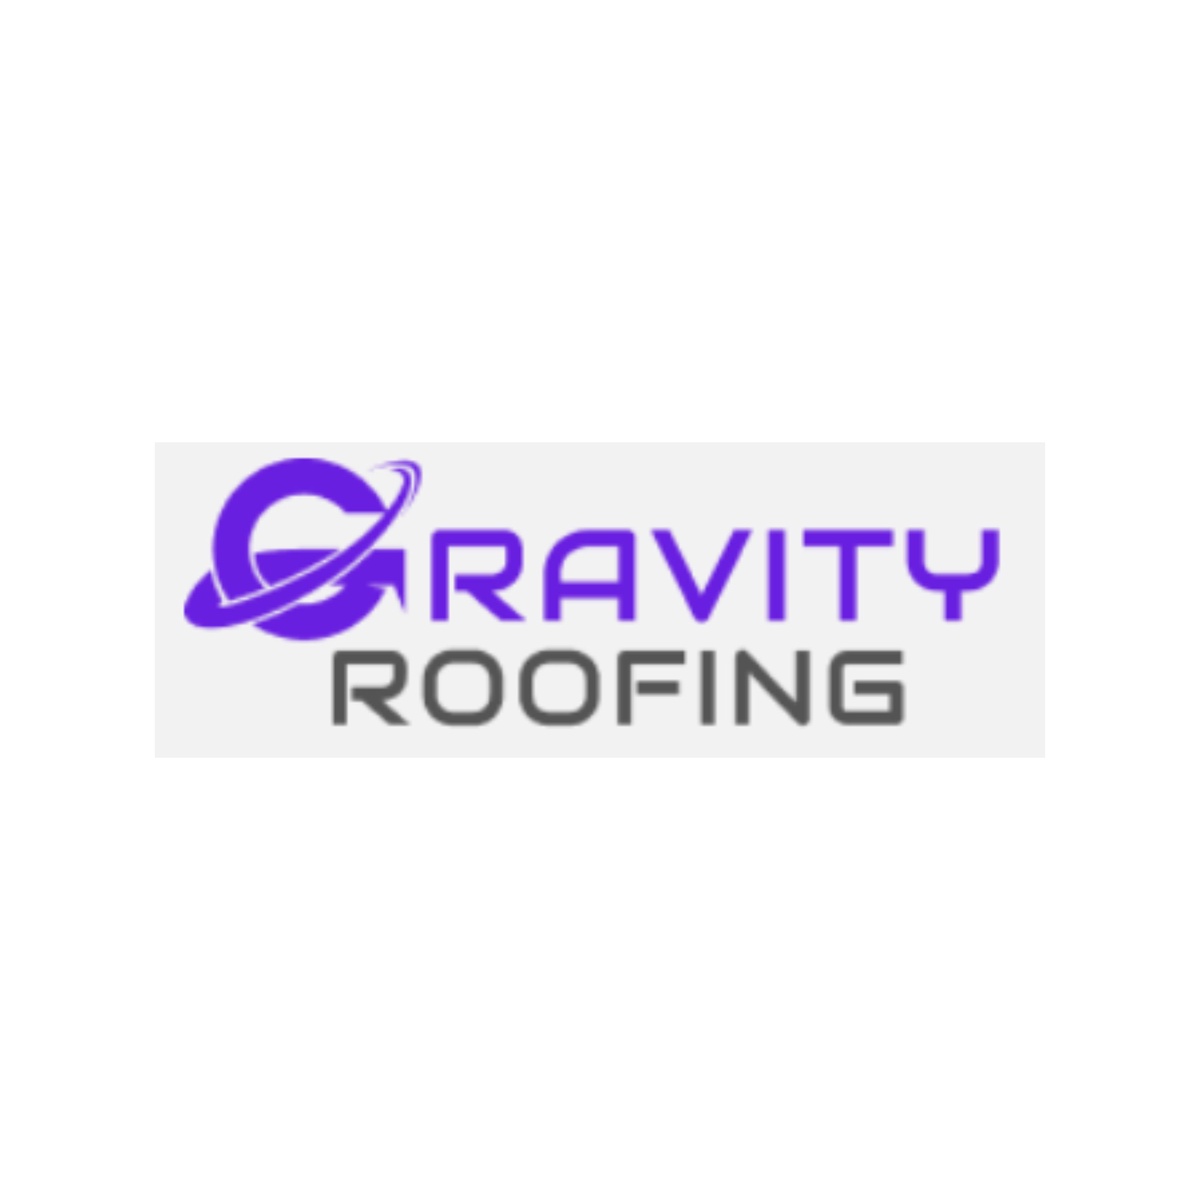 Gravity Roofing: Elevating Your Roofing Experience in Orlando, FL